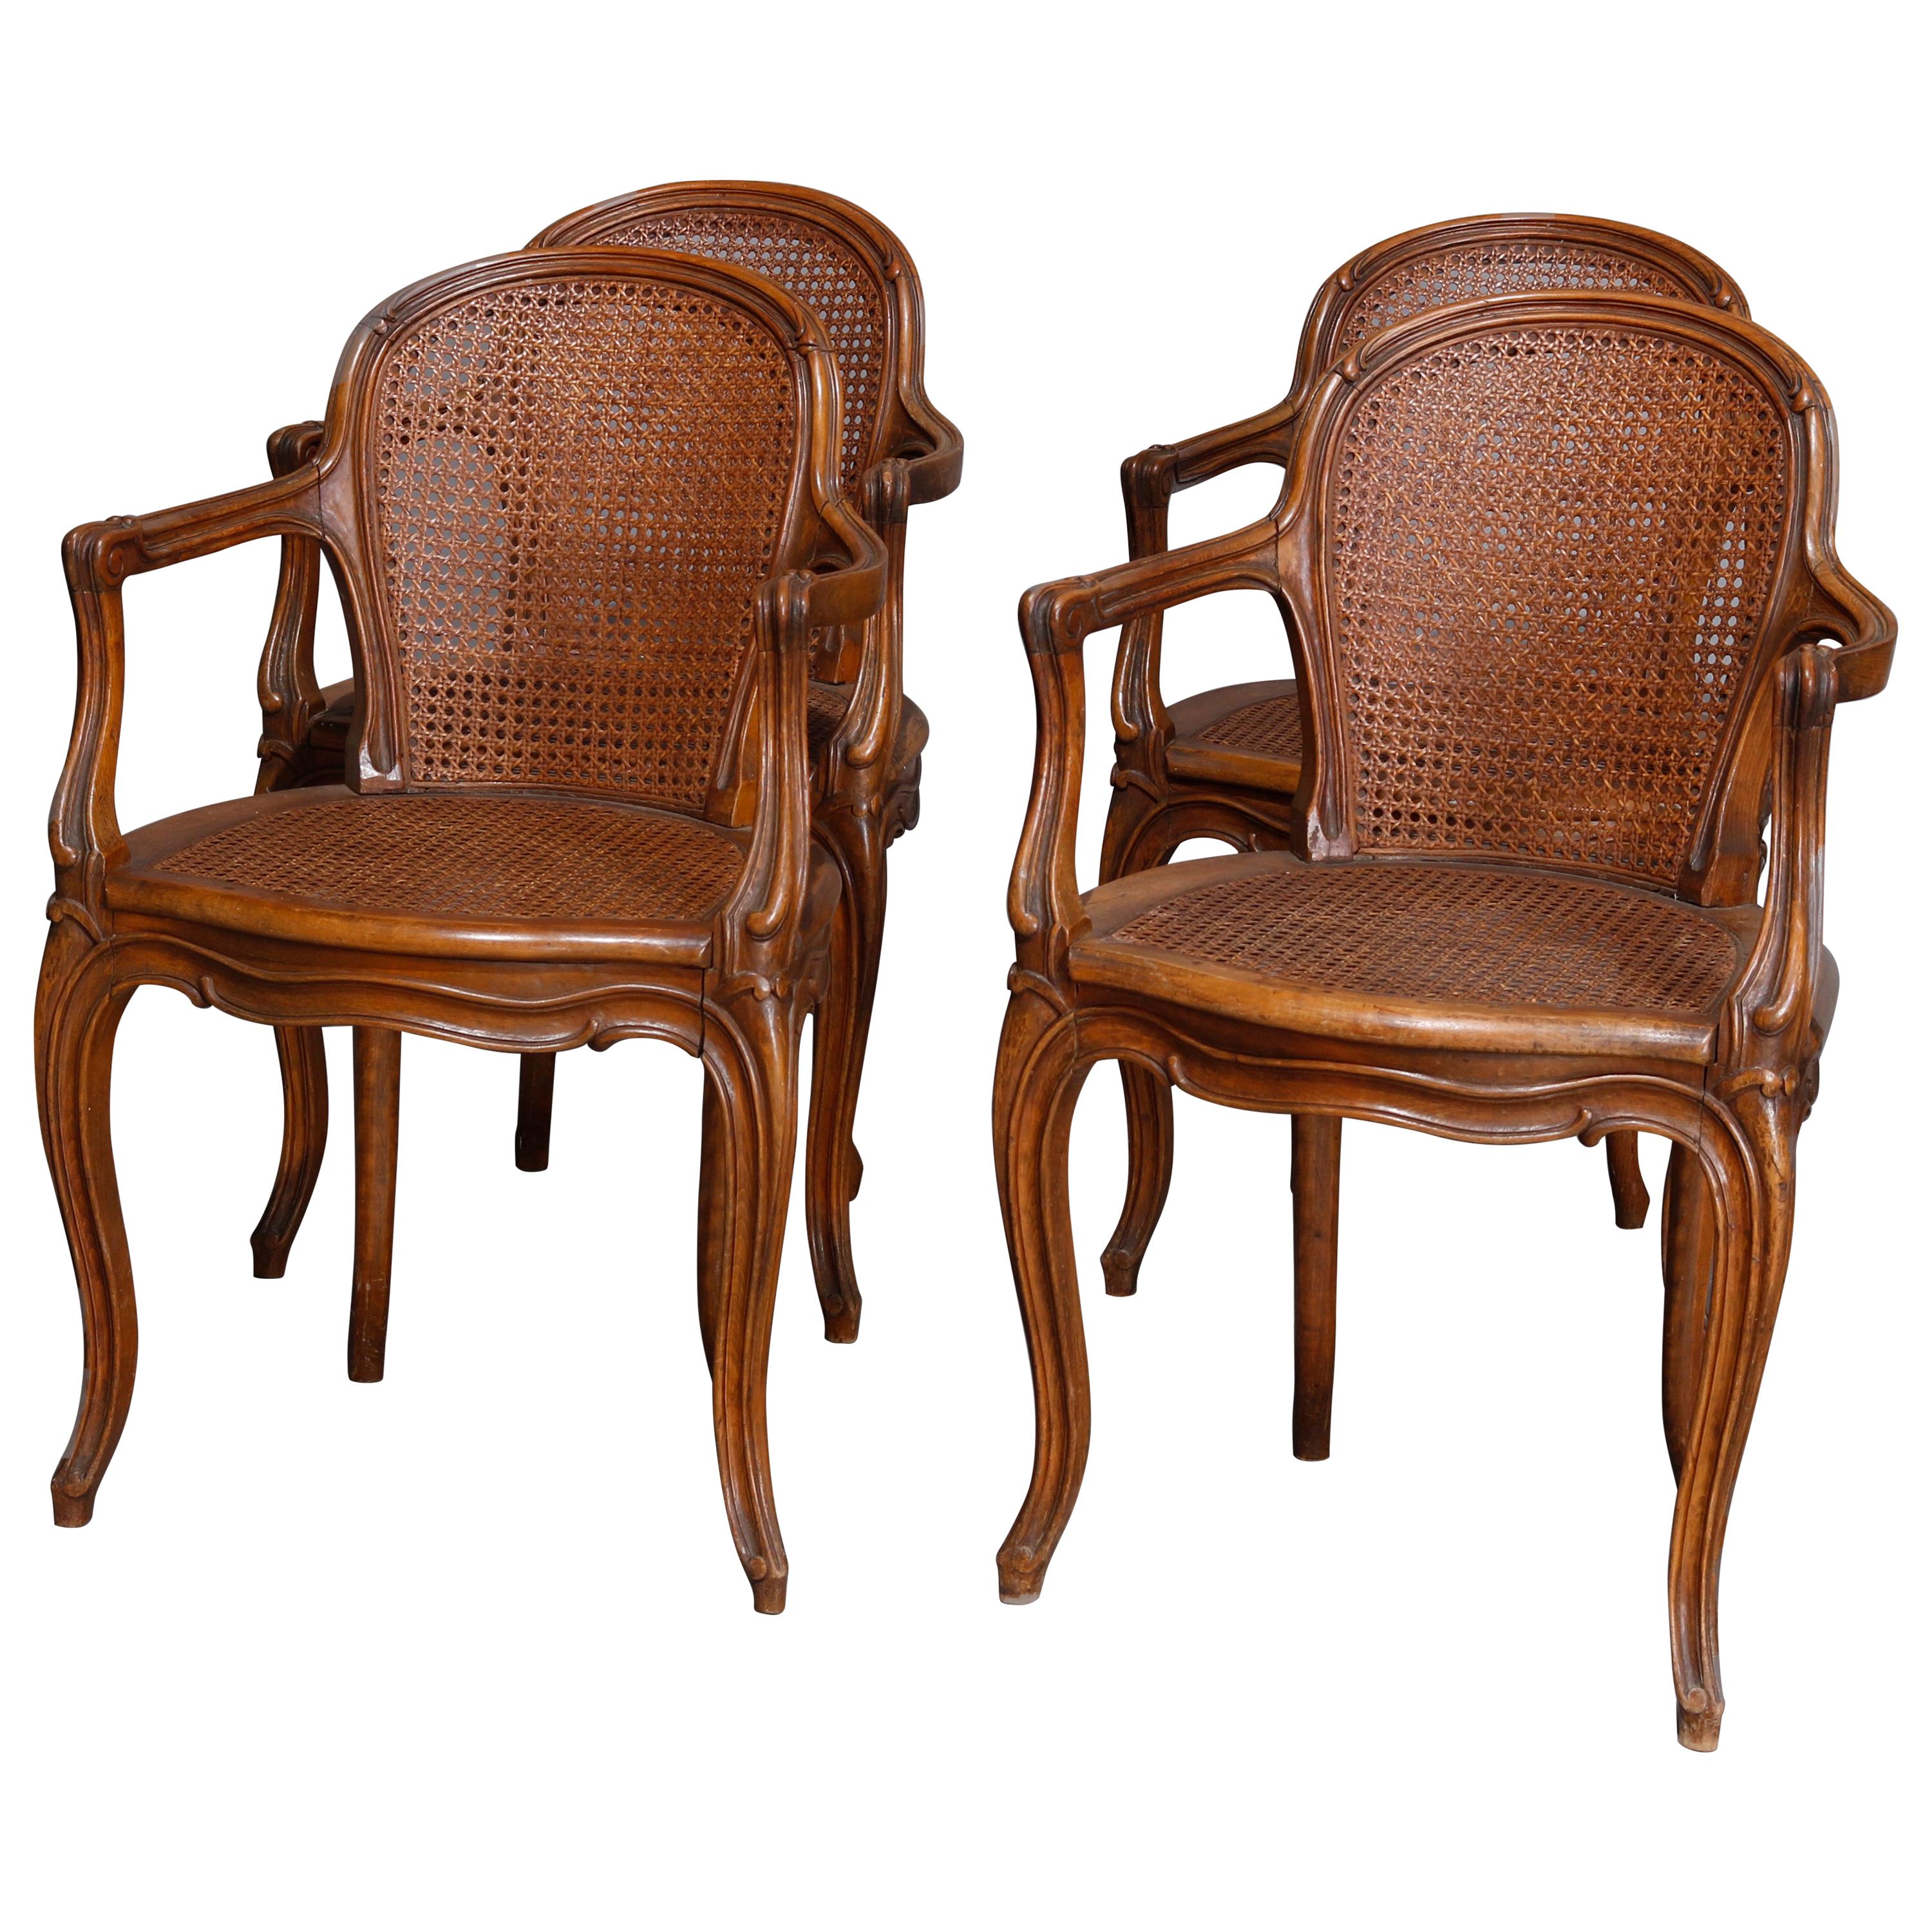 Set of Four Antique French Louis XVI Carved Walnut and Caned Armchairs